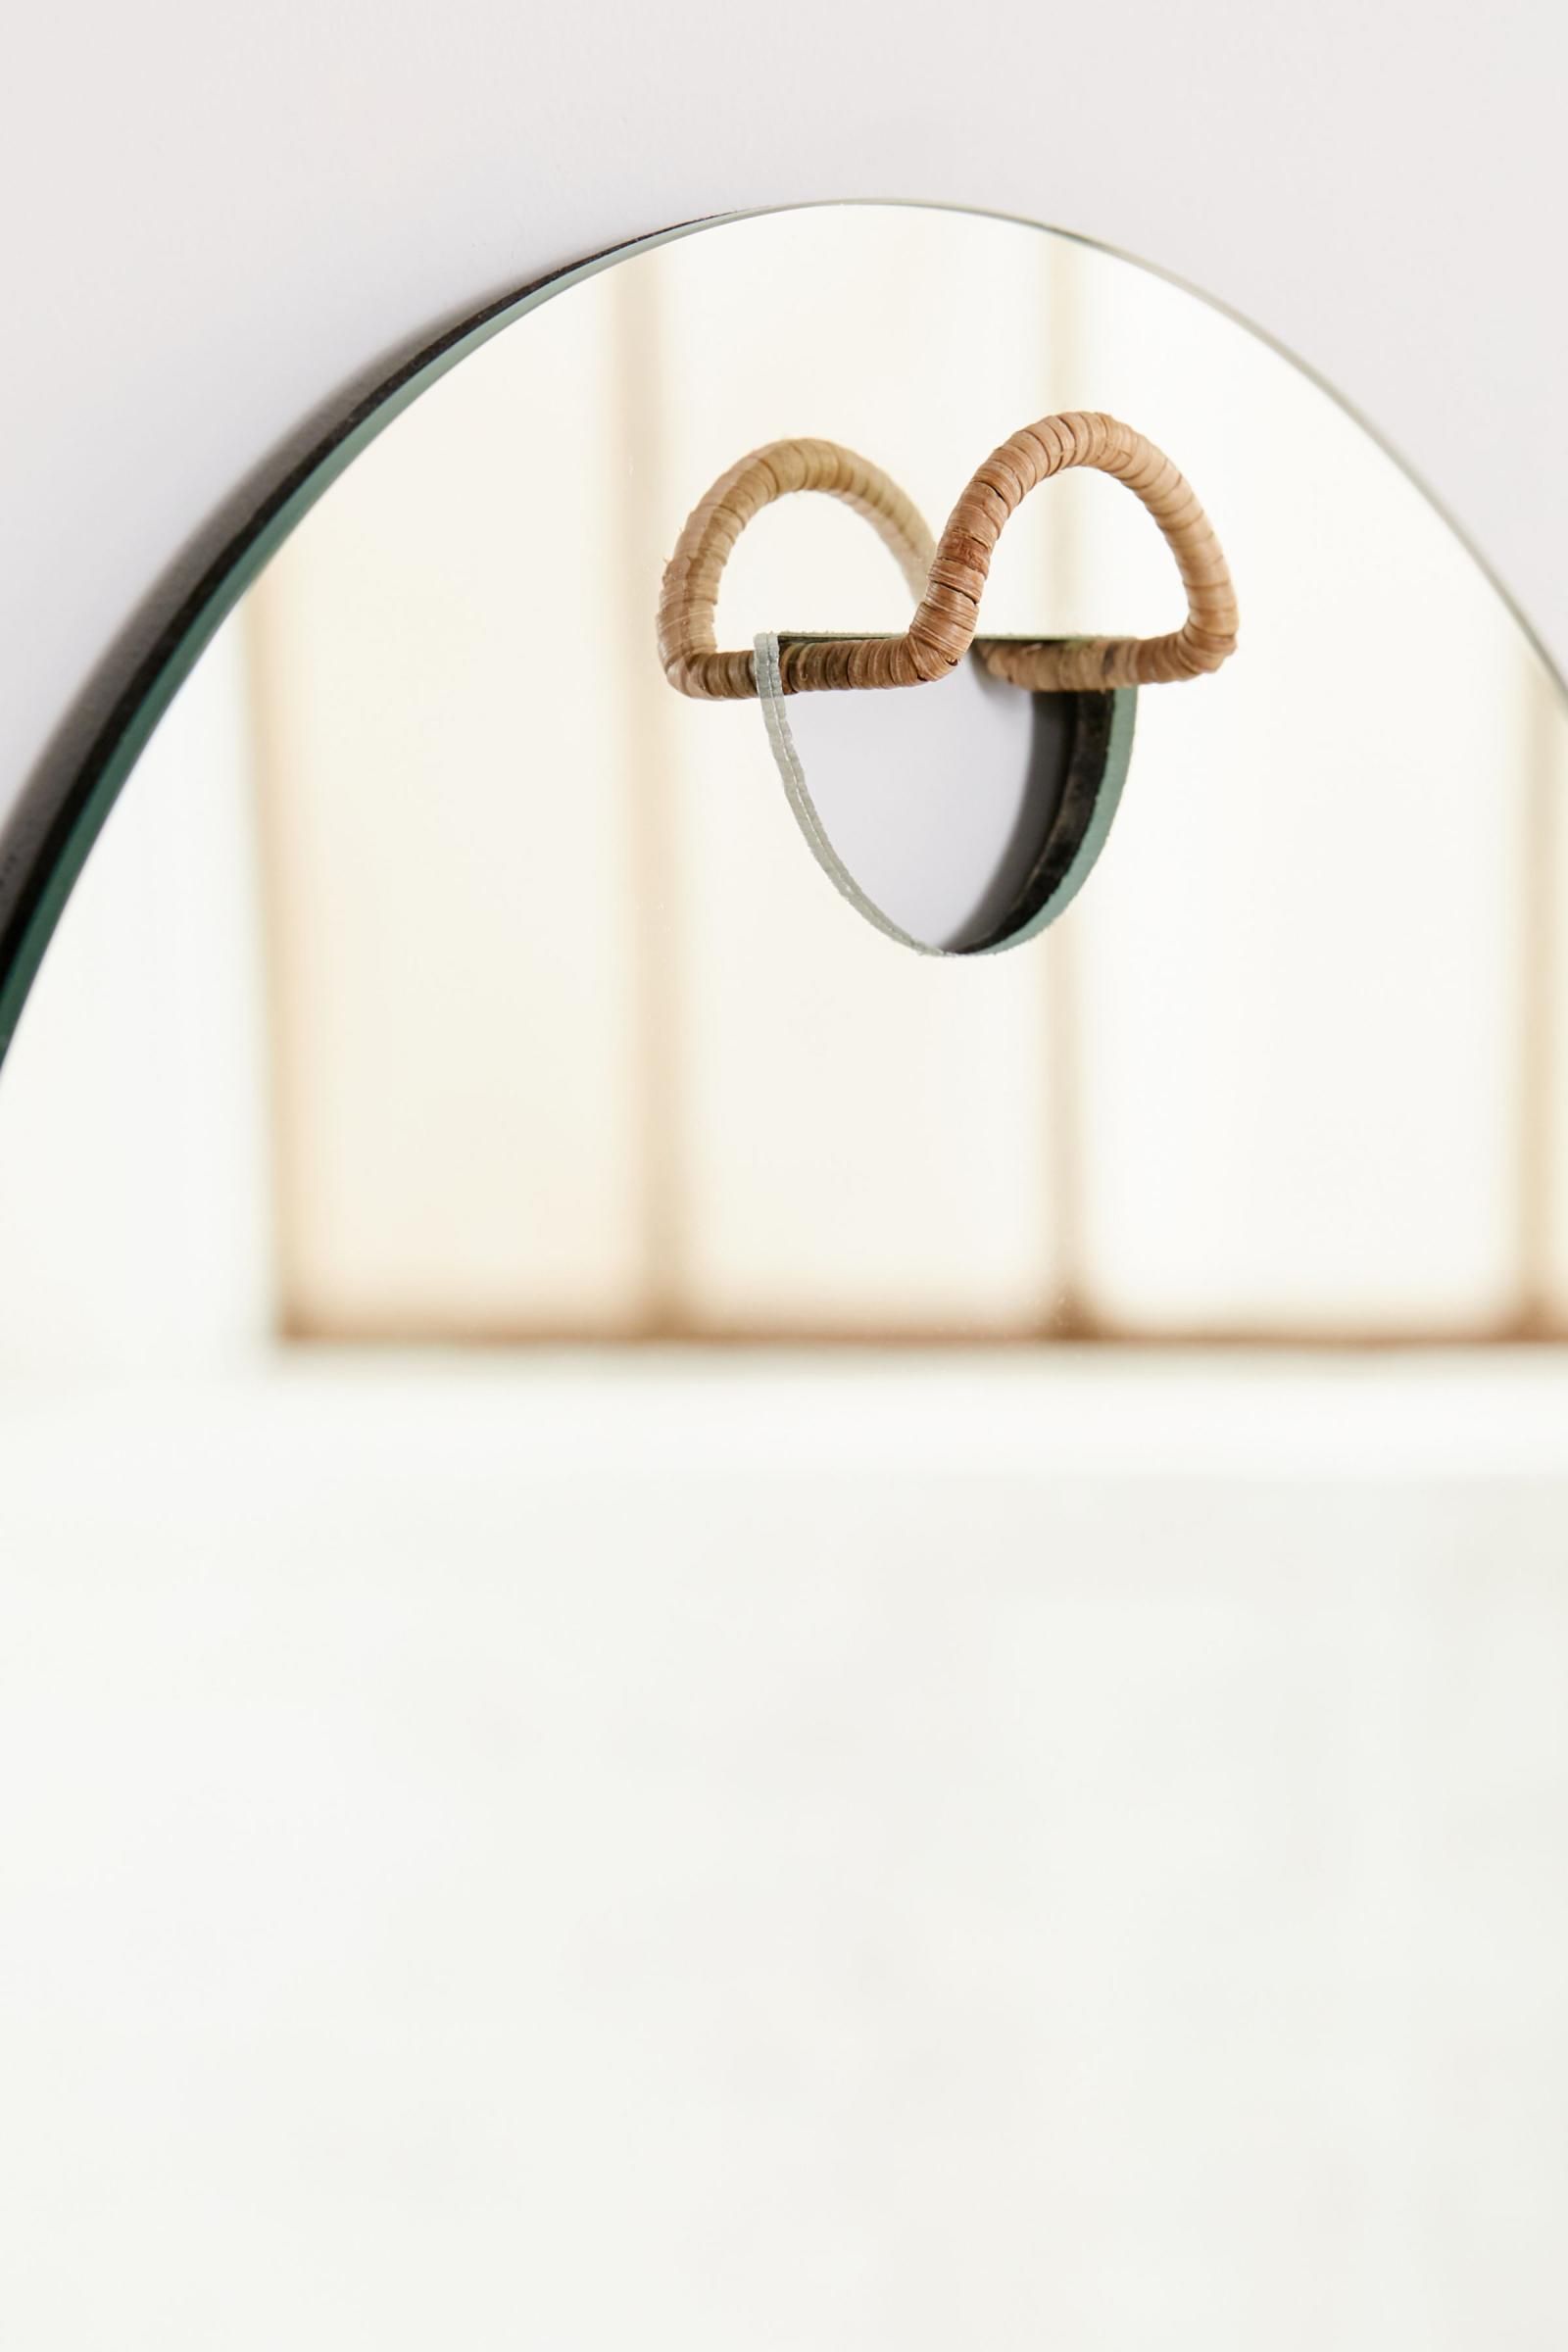 Walden Wrapped Rattan Round Wall Mirror | Urban Outfitters Singapore In Rattan Wrapped Wall Mirrors (View 12 of 15)